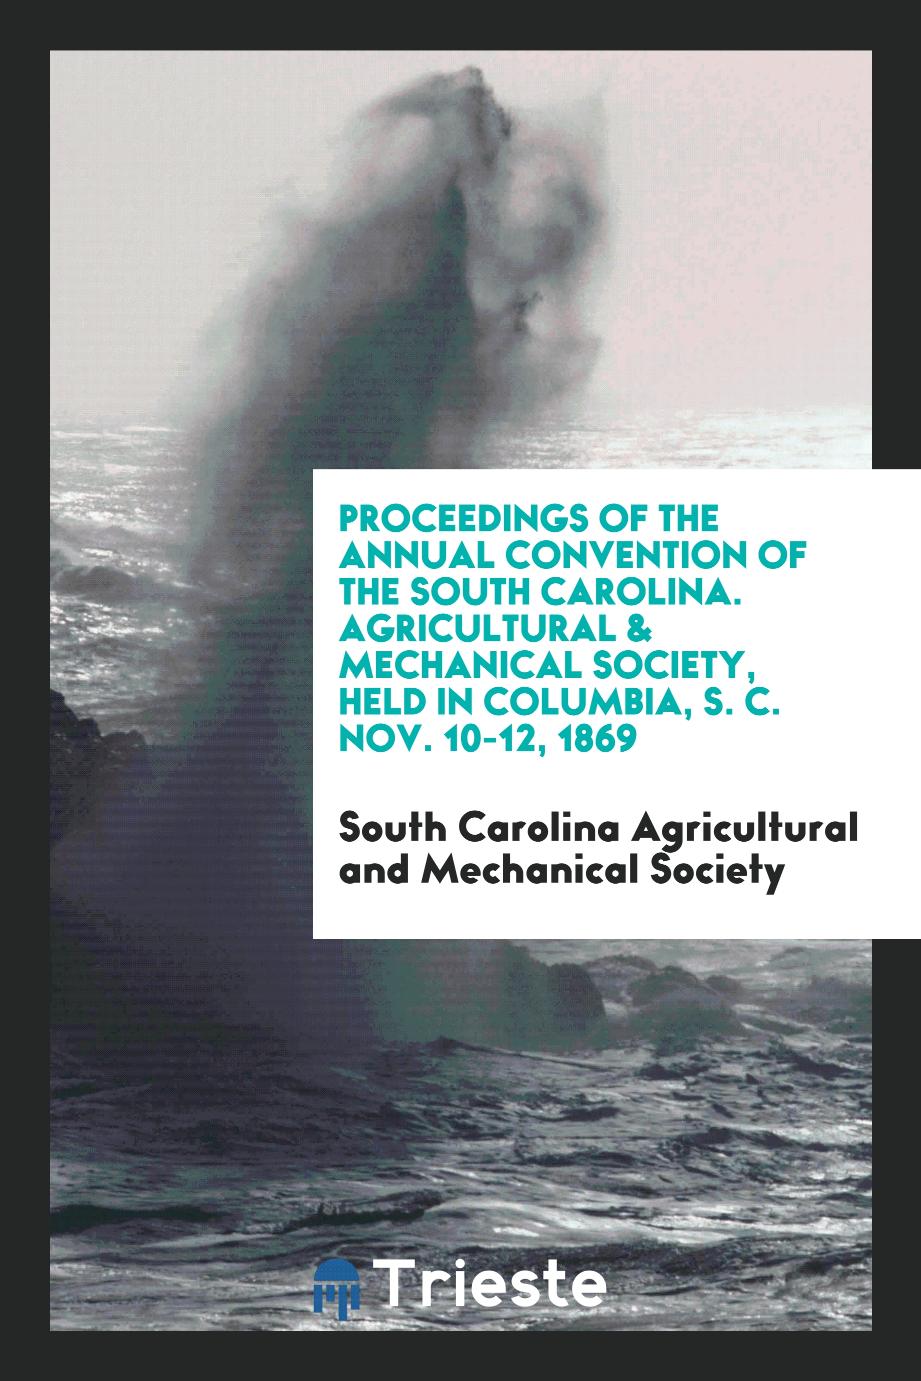 Proceedings of the Annual Convention of the South Carolina. Agricultural & mechanical society, held in Columbia, S. C. Nov. 10-12, 1869